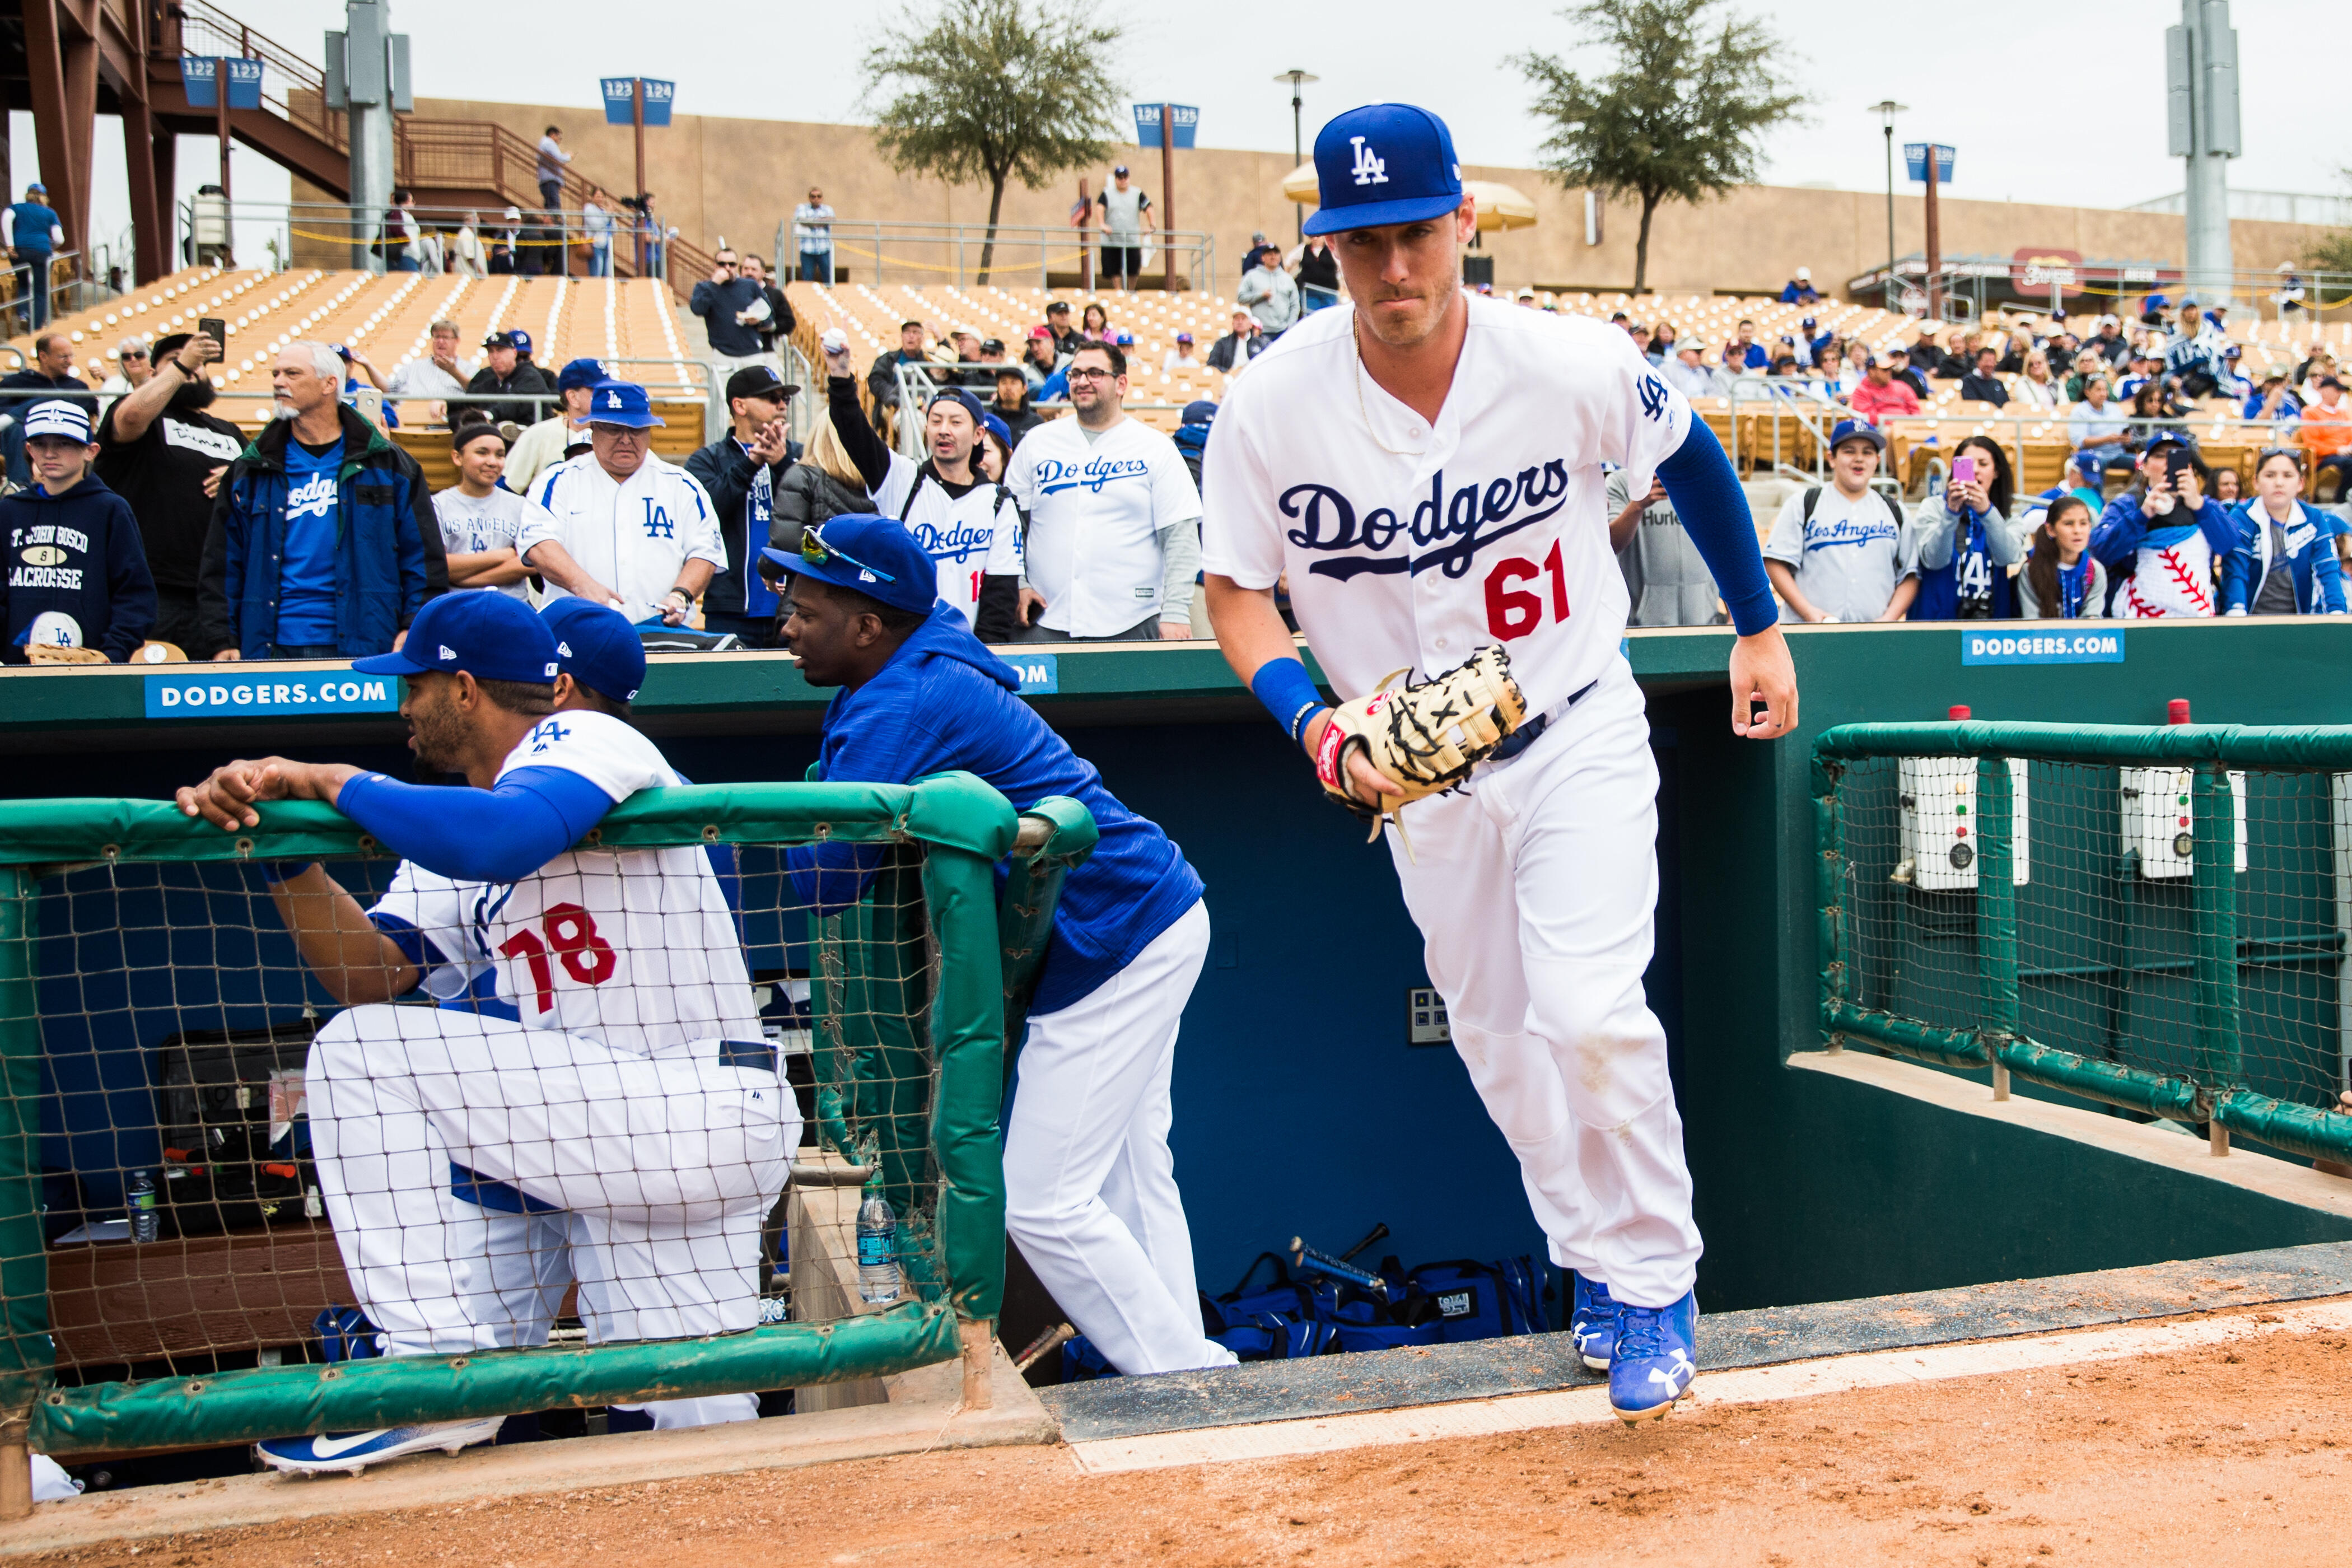 GLENDALE, AZ - FEBRUARY 27:  Cody Bellinger #61 of the Los Angeles Dodgers takes the field before a spring training game against the Colorado Rockies at Camelback Ranch on February 27, 2017 in Glendale, Arizona. (Photo by Rob Tringali/Getty Images)